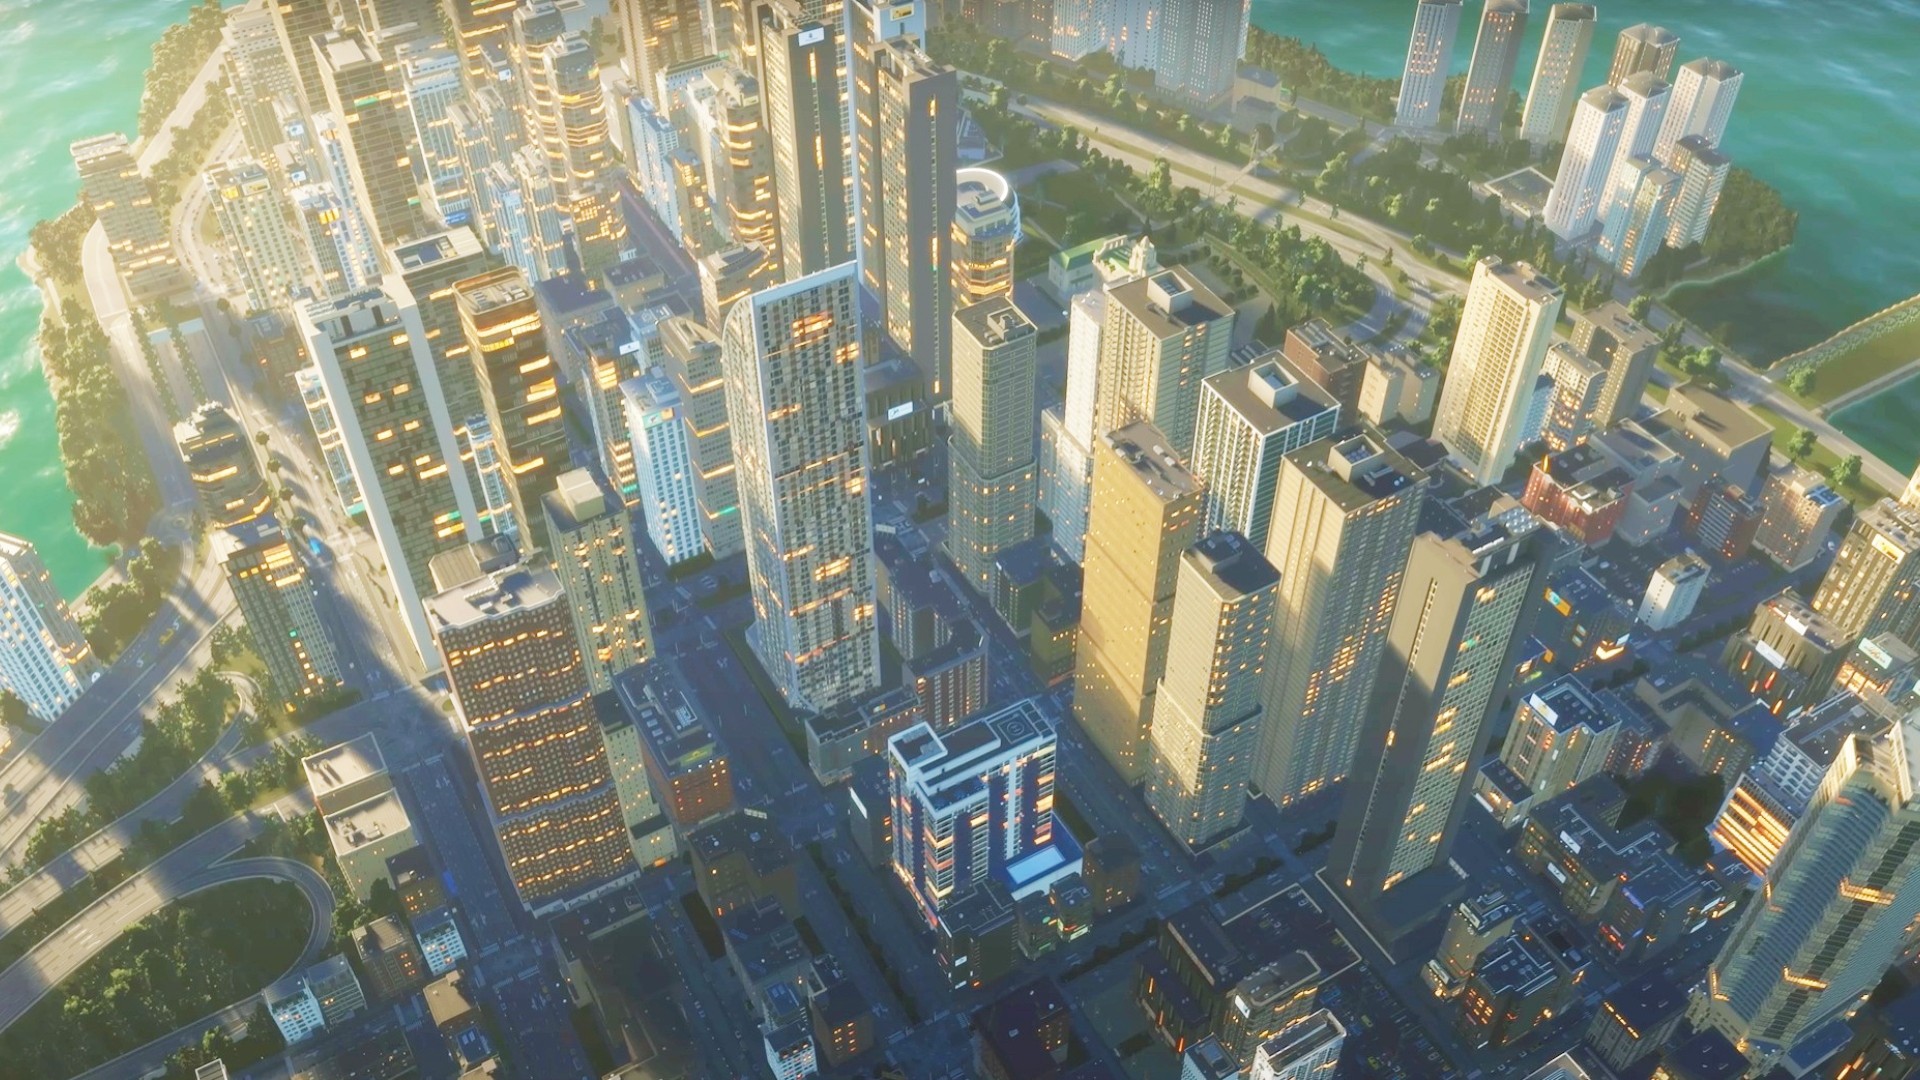 Cities: Skylines 2: release date, trailers, gameplay, and more